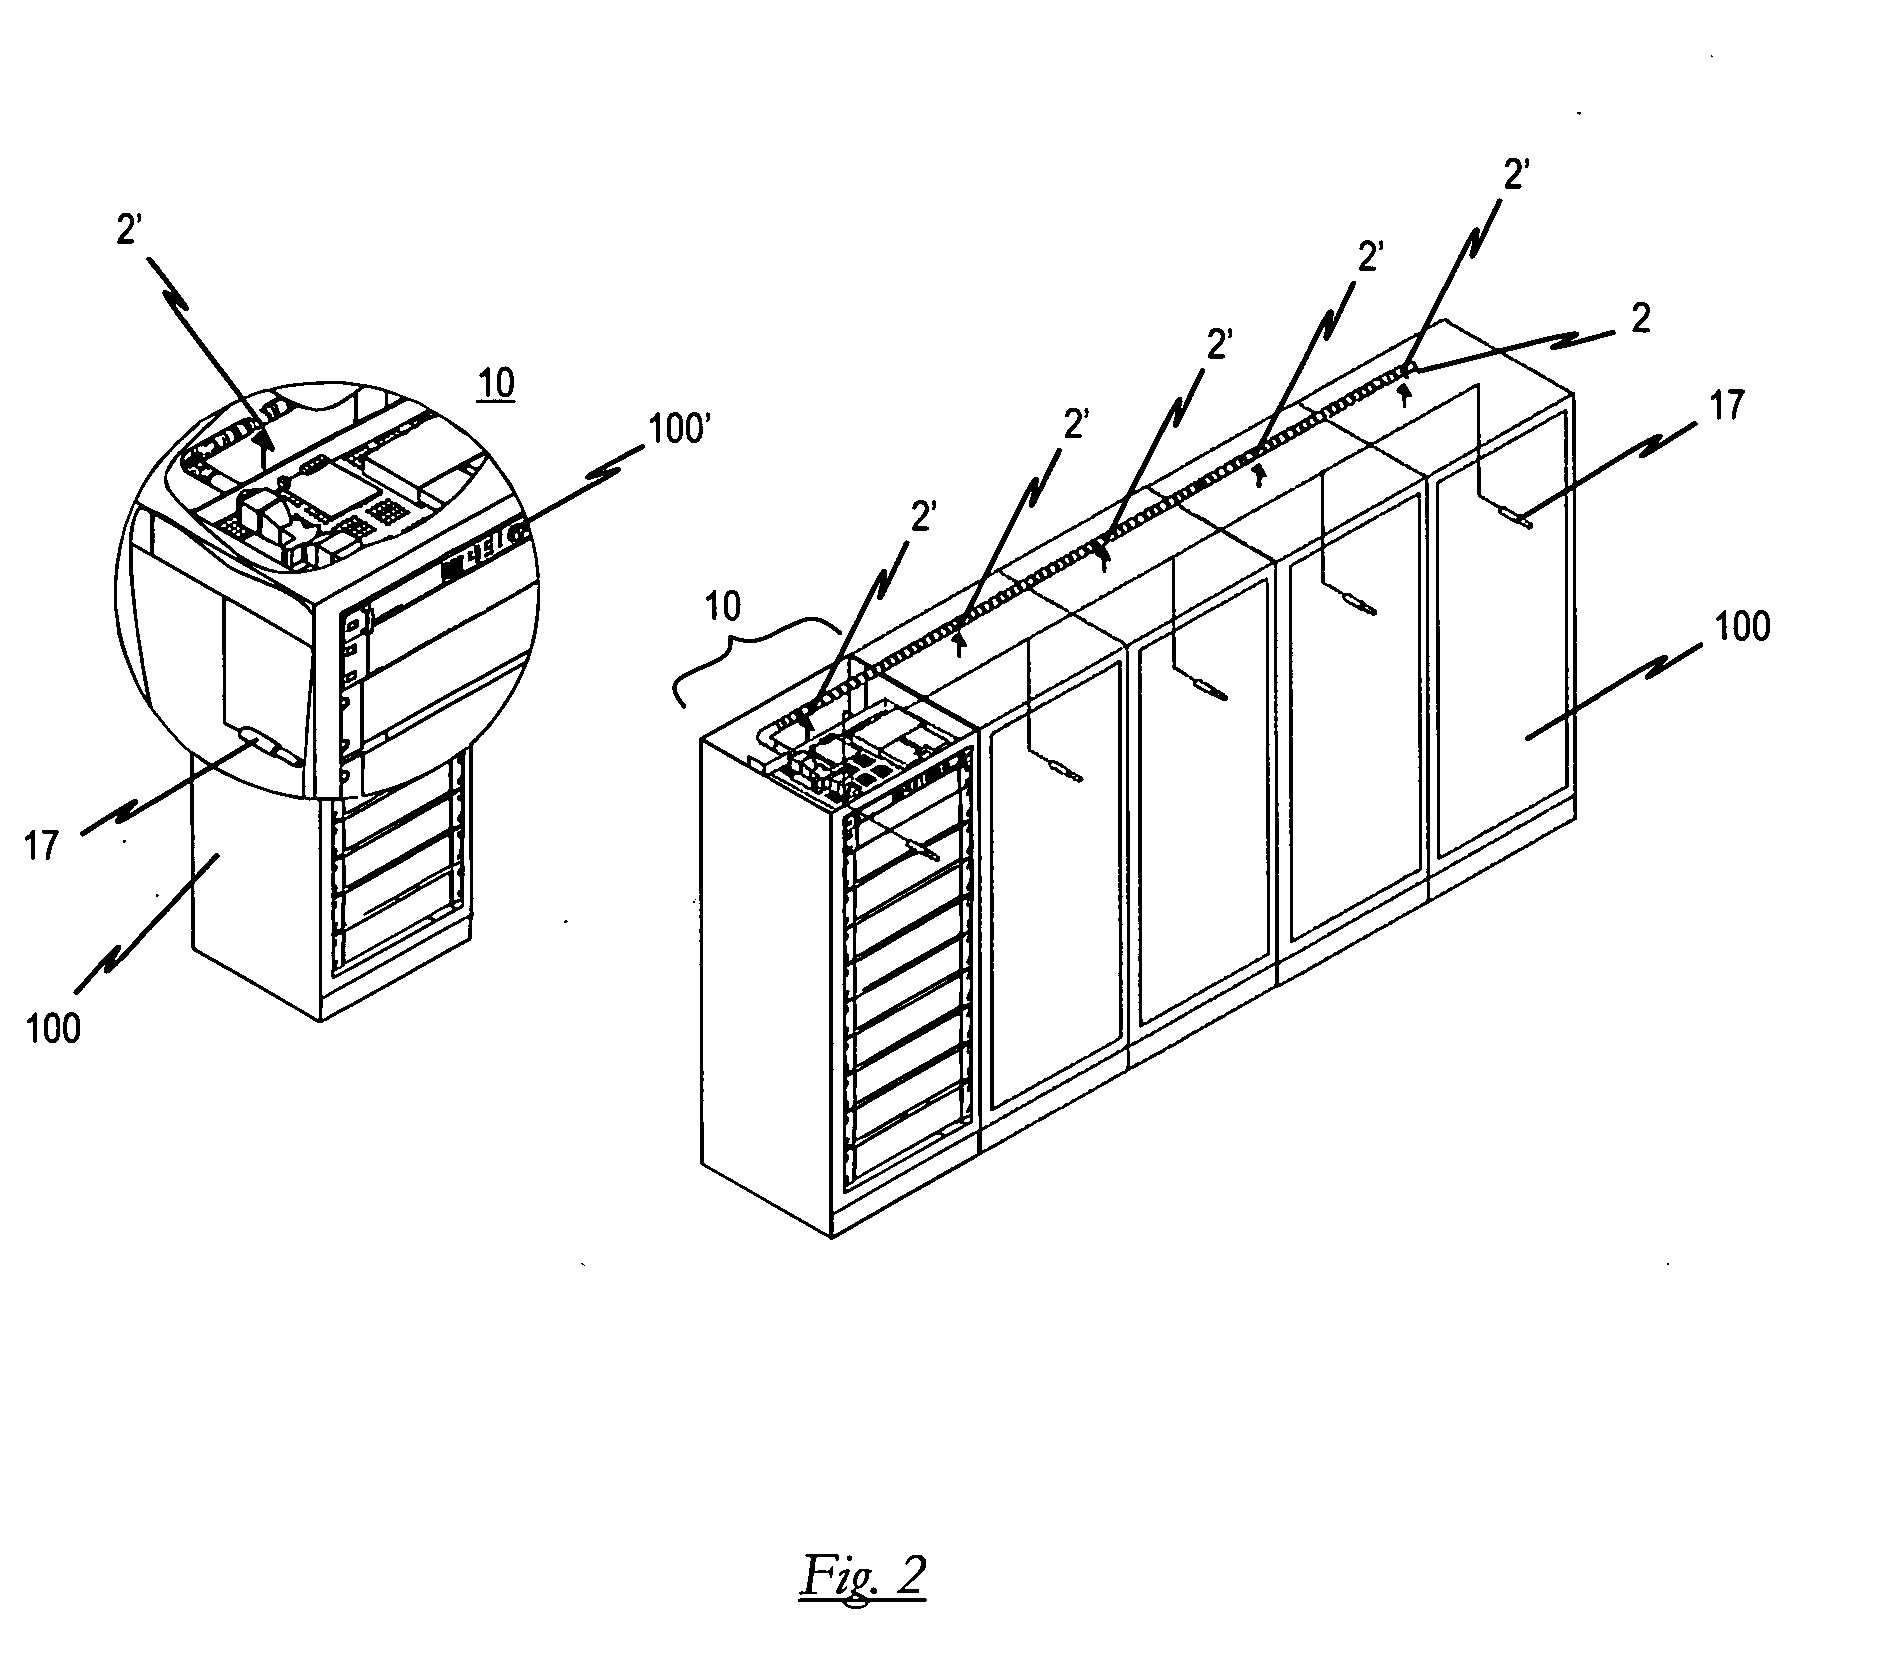 Apparatus for fire detection in an electrical equipment rack